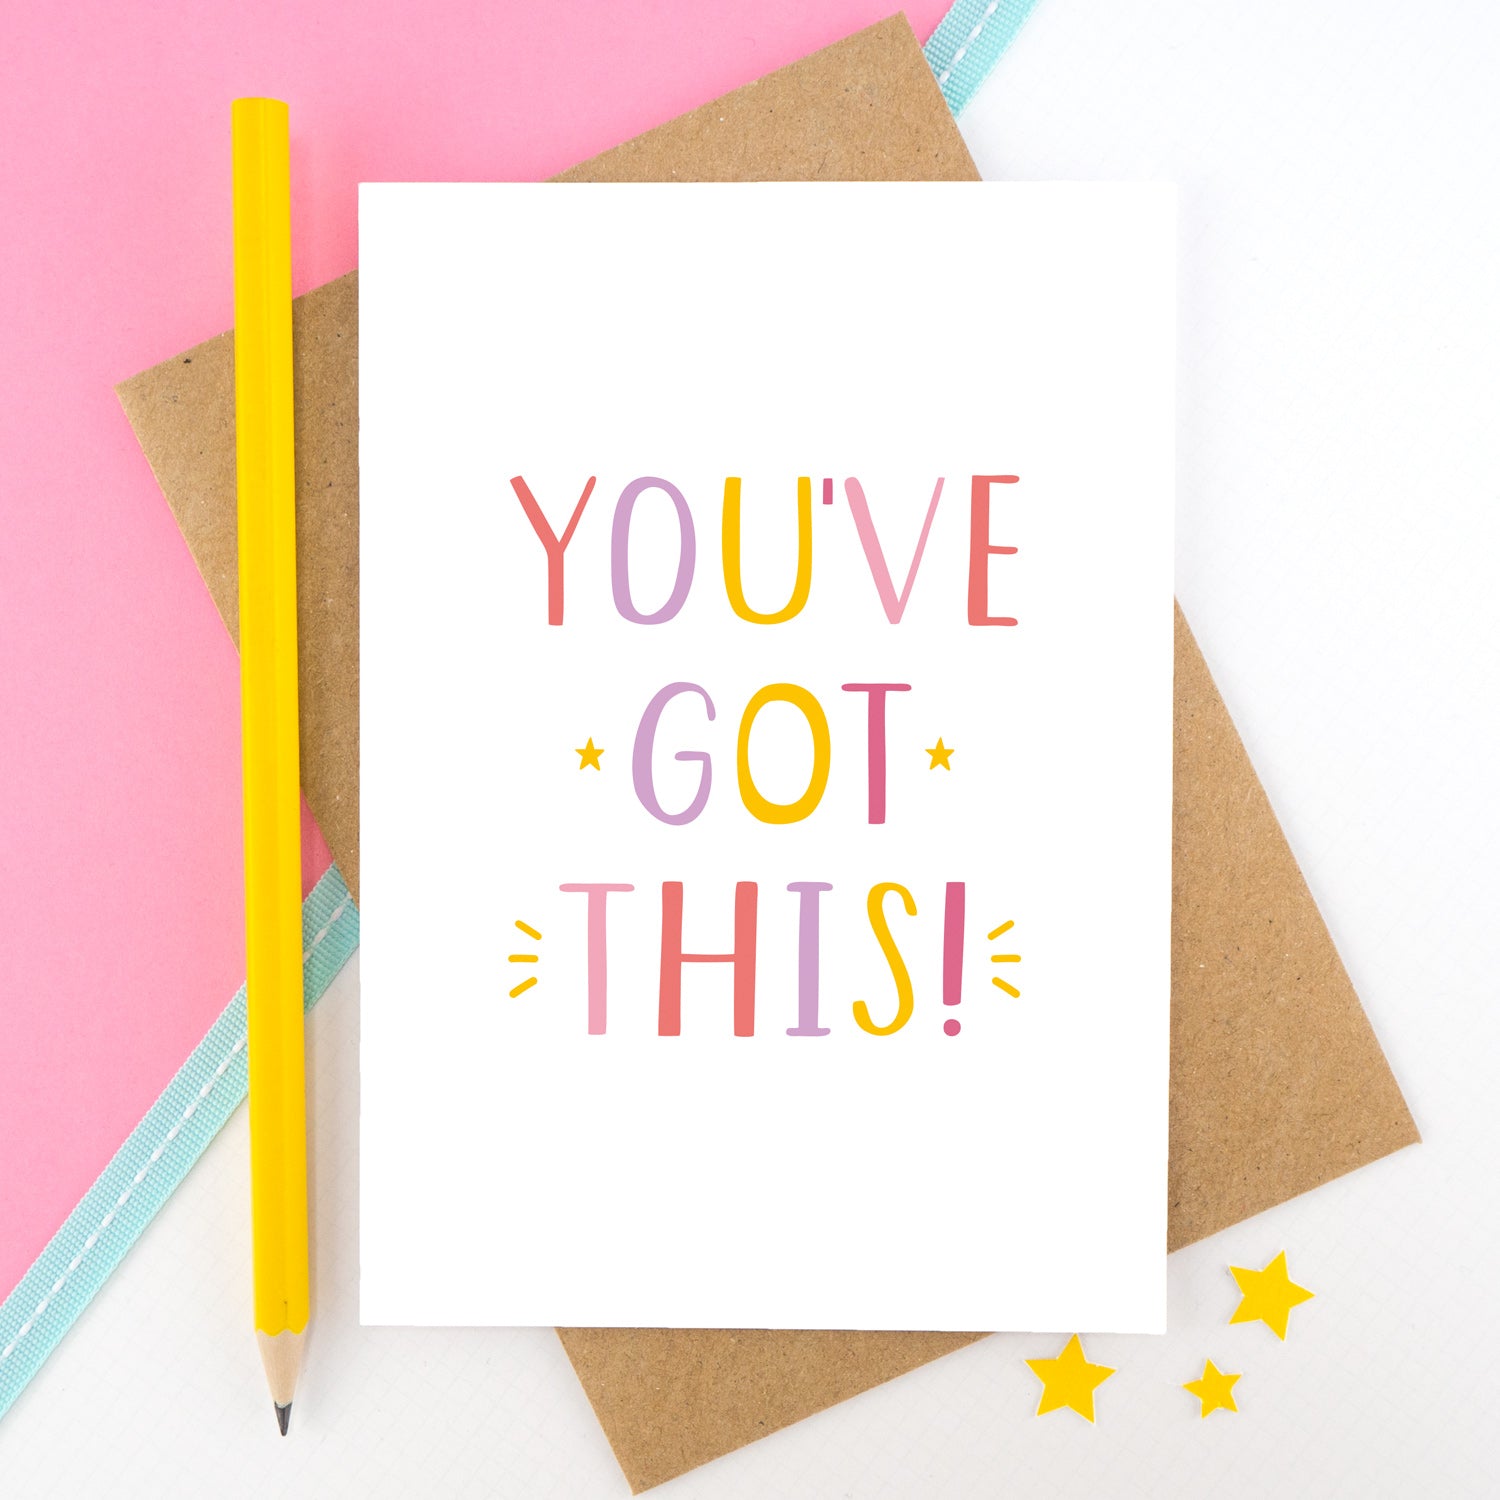 You've got this! A positive encouragement card photographed on a pink and white background with a teal ribbon and bright yellow pencil. The lettering on this card is in pinks, yellow and lilac.